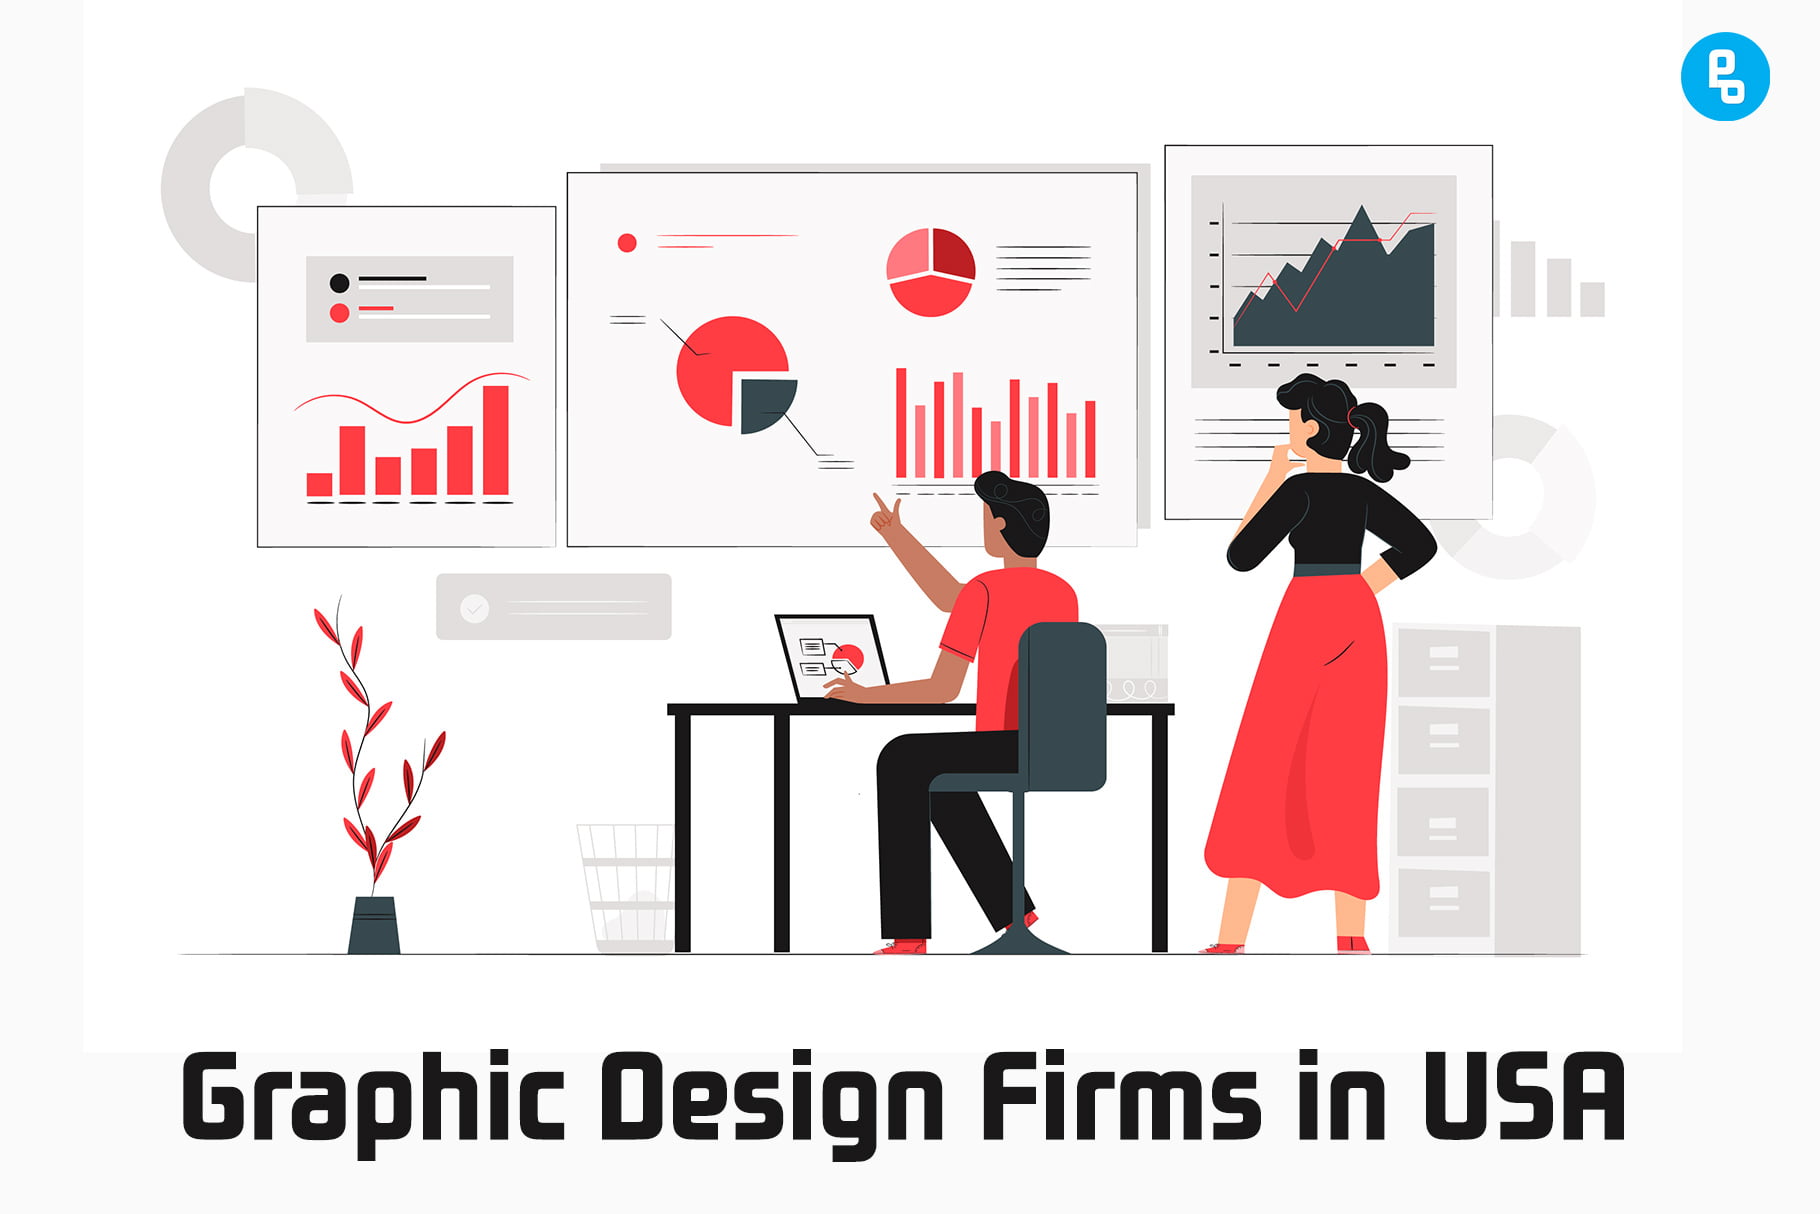 We've put together this list of some of the top graphic design firms in the United States--and yes, they're all based in our great country!